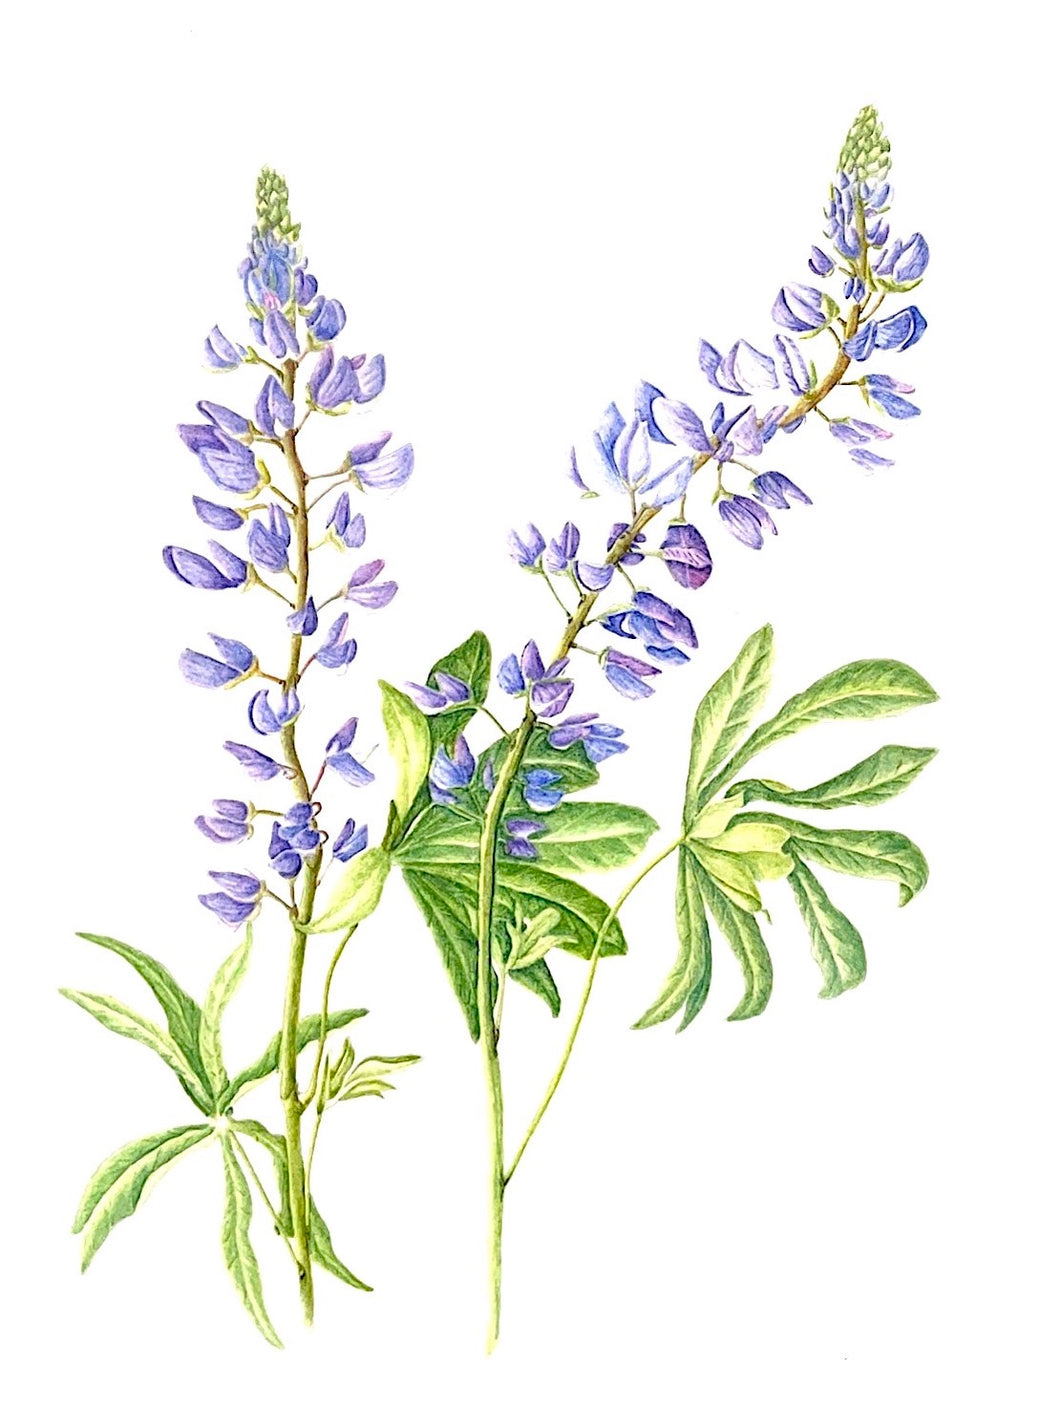 Childs River Lupine Print on Hahnemuhle art paper with 11x14 mat